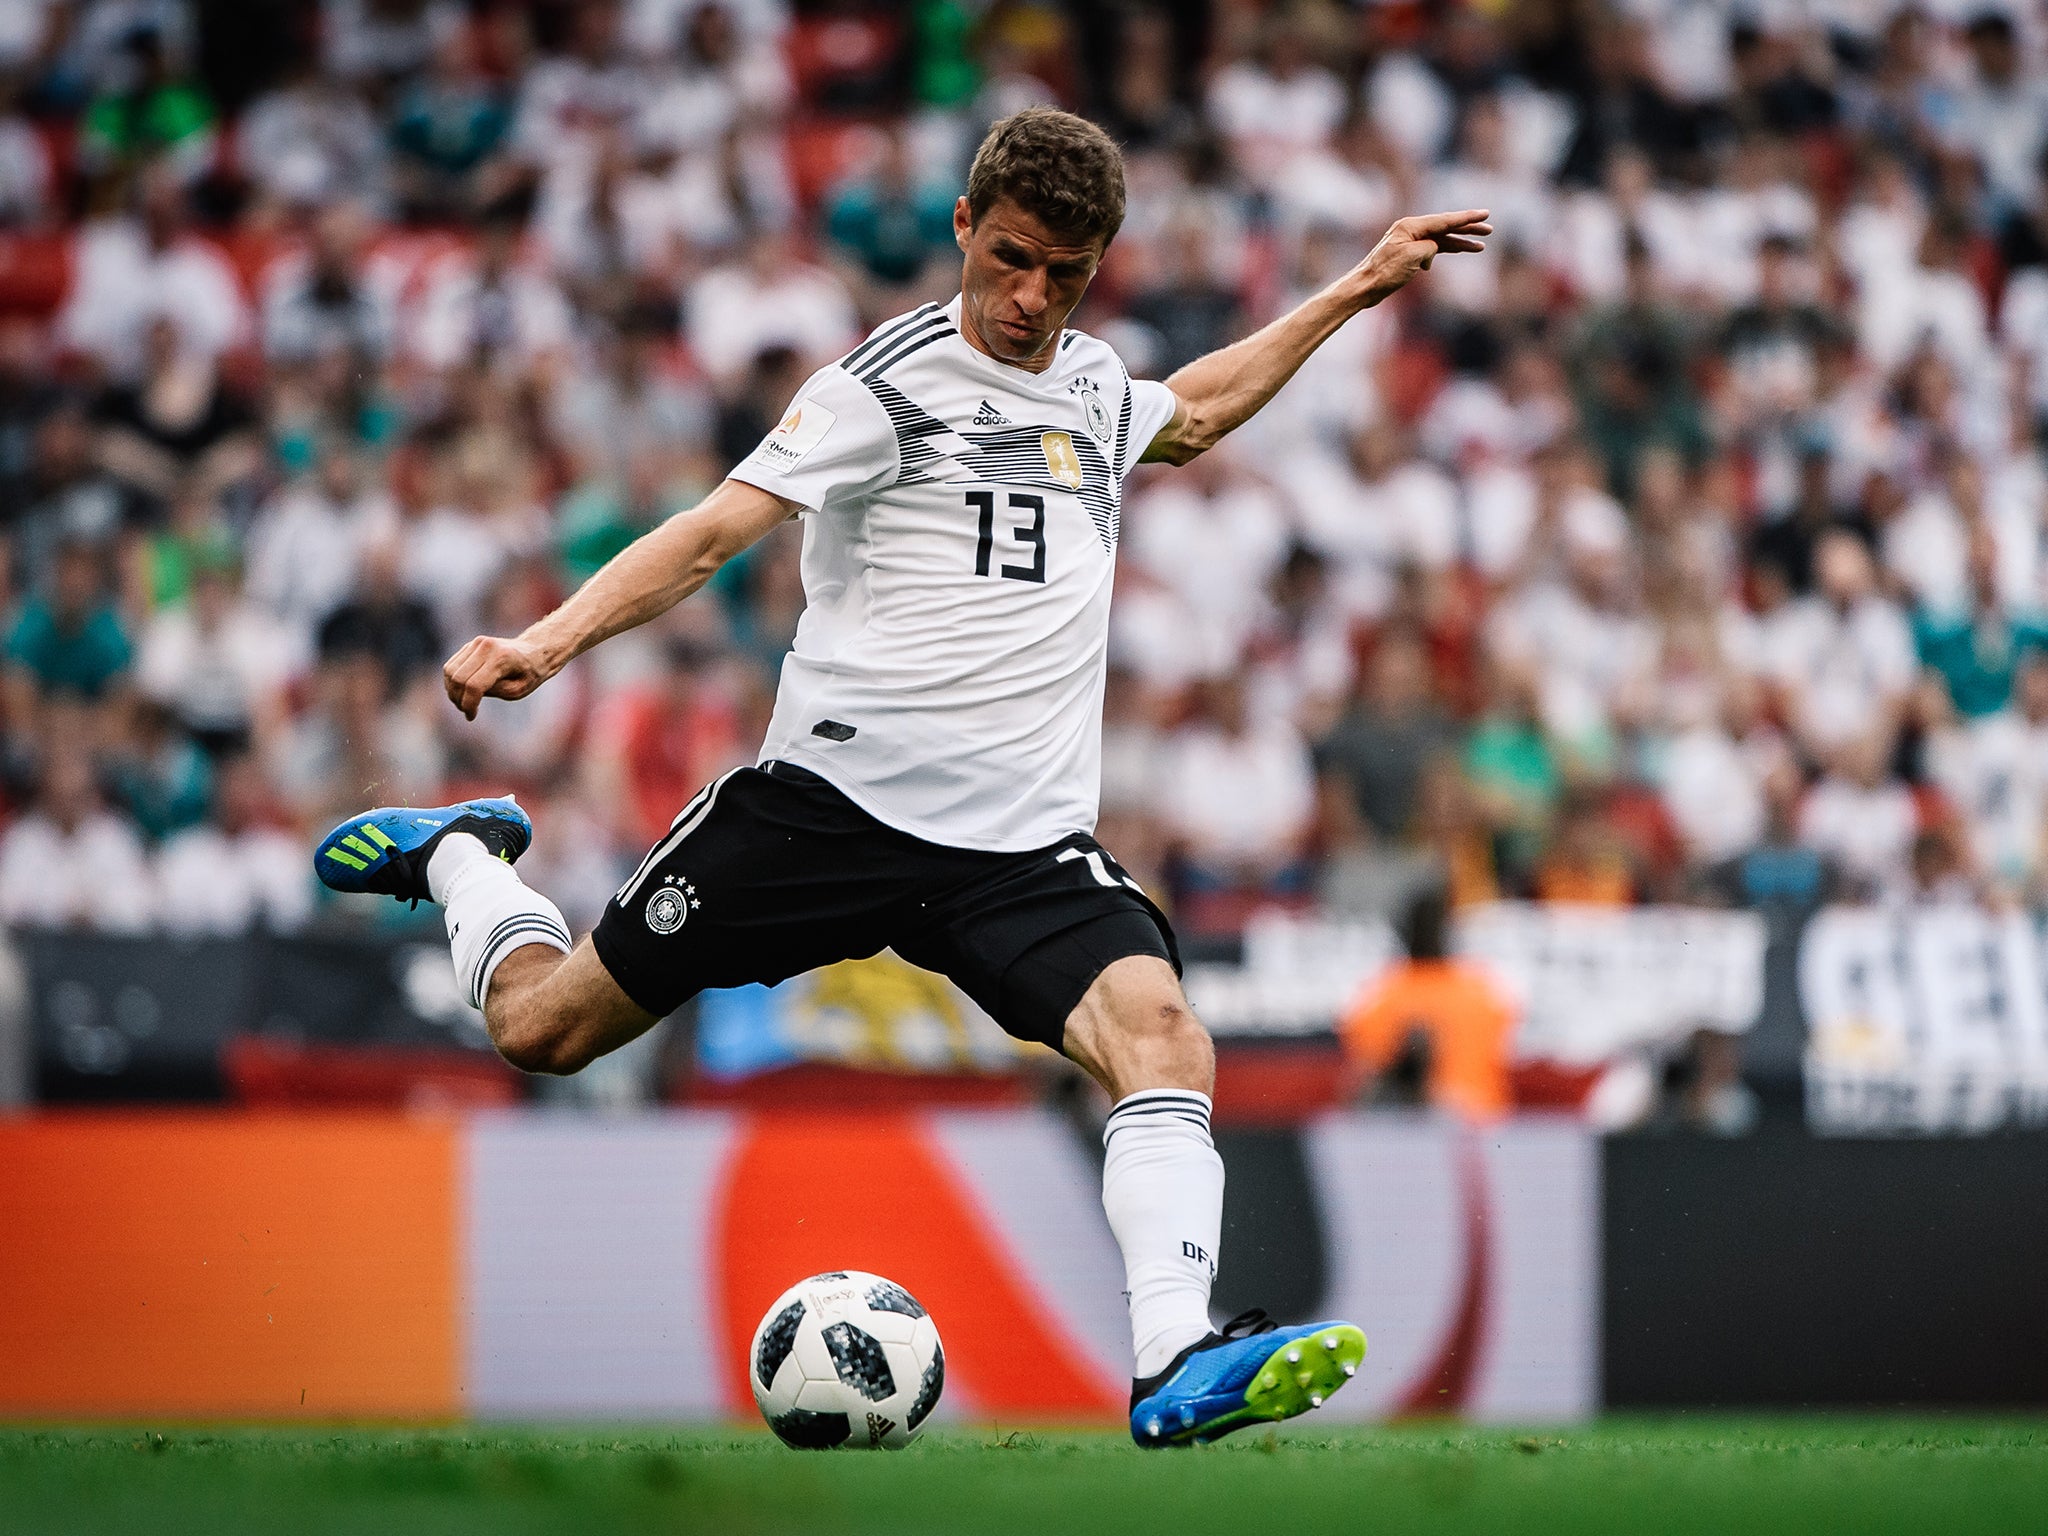 Thomas Müller is the closest player we've seen to Iniesta's natural talent